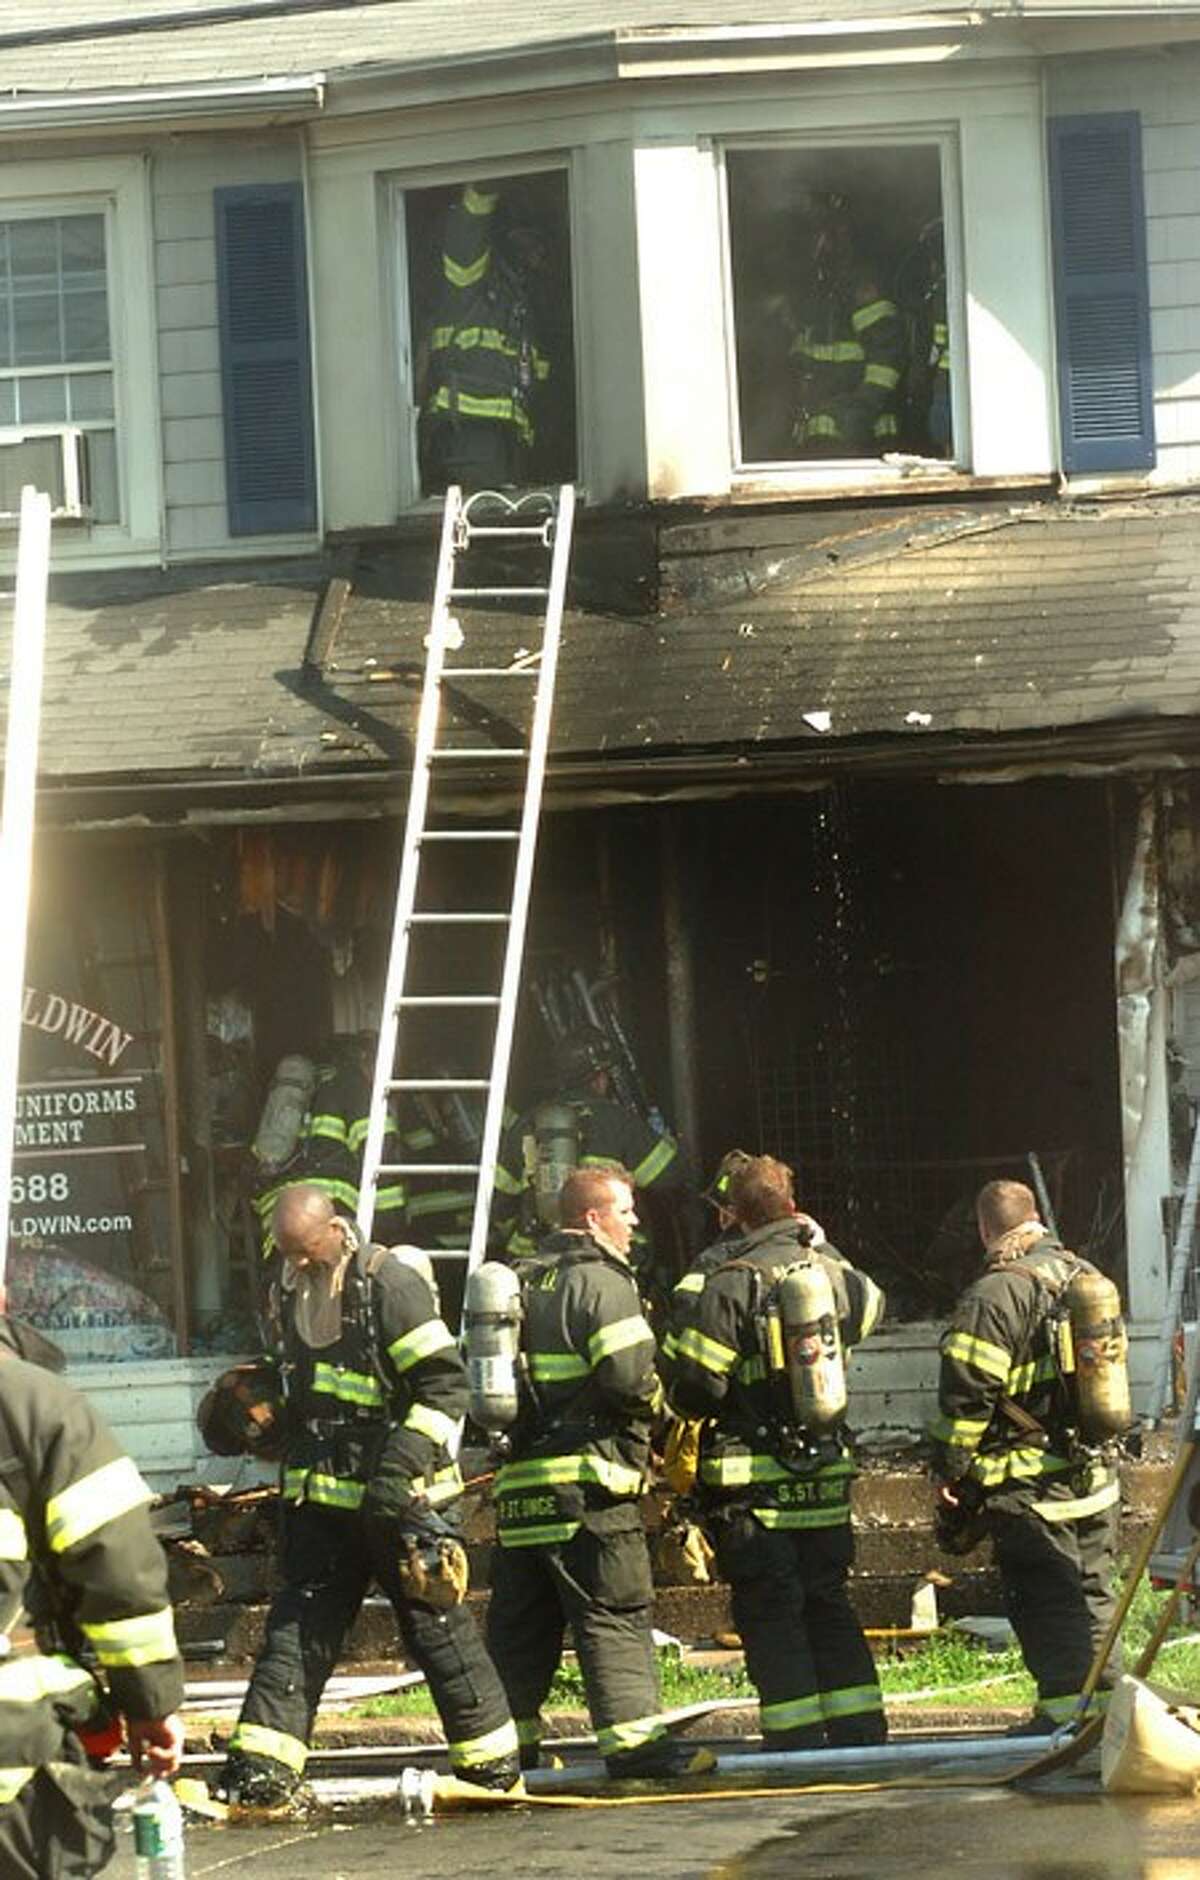 Structure fire burns out retail and residental spaces on 1st street in Norwalk on Monday morning/hour photo matthew vinci